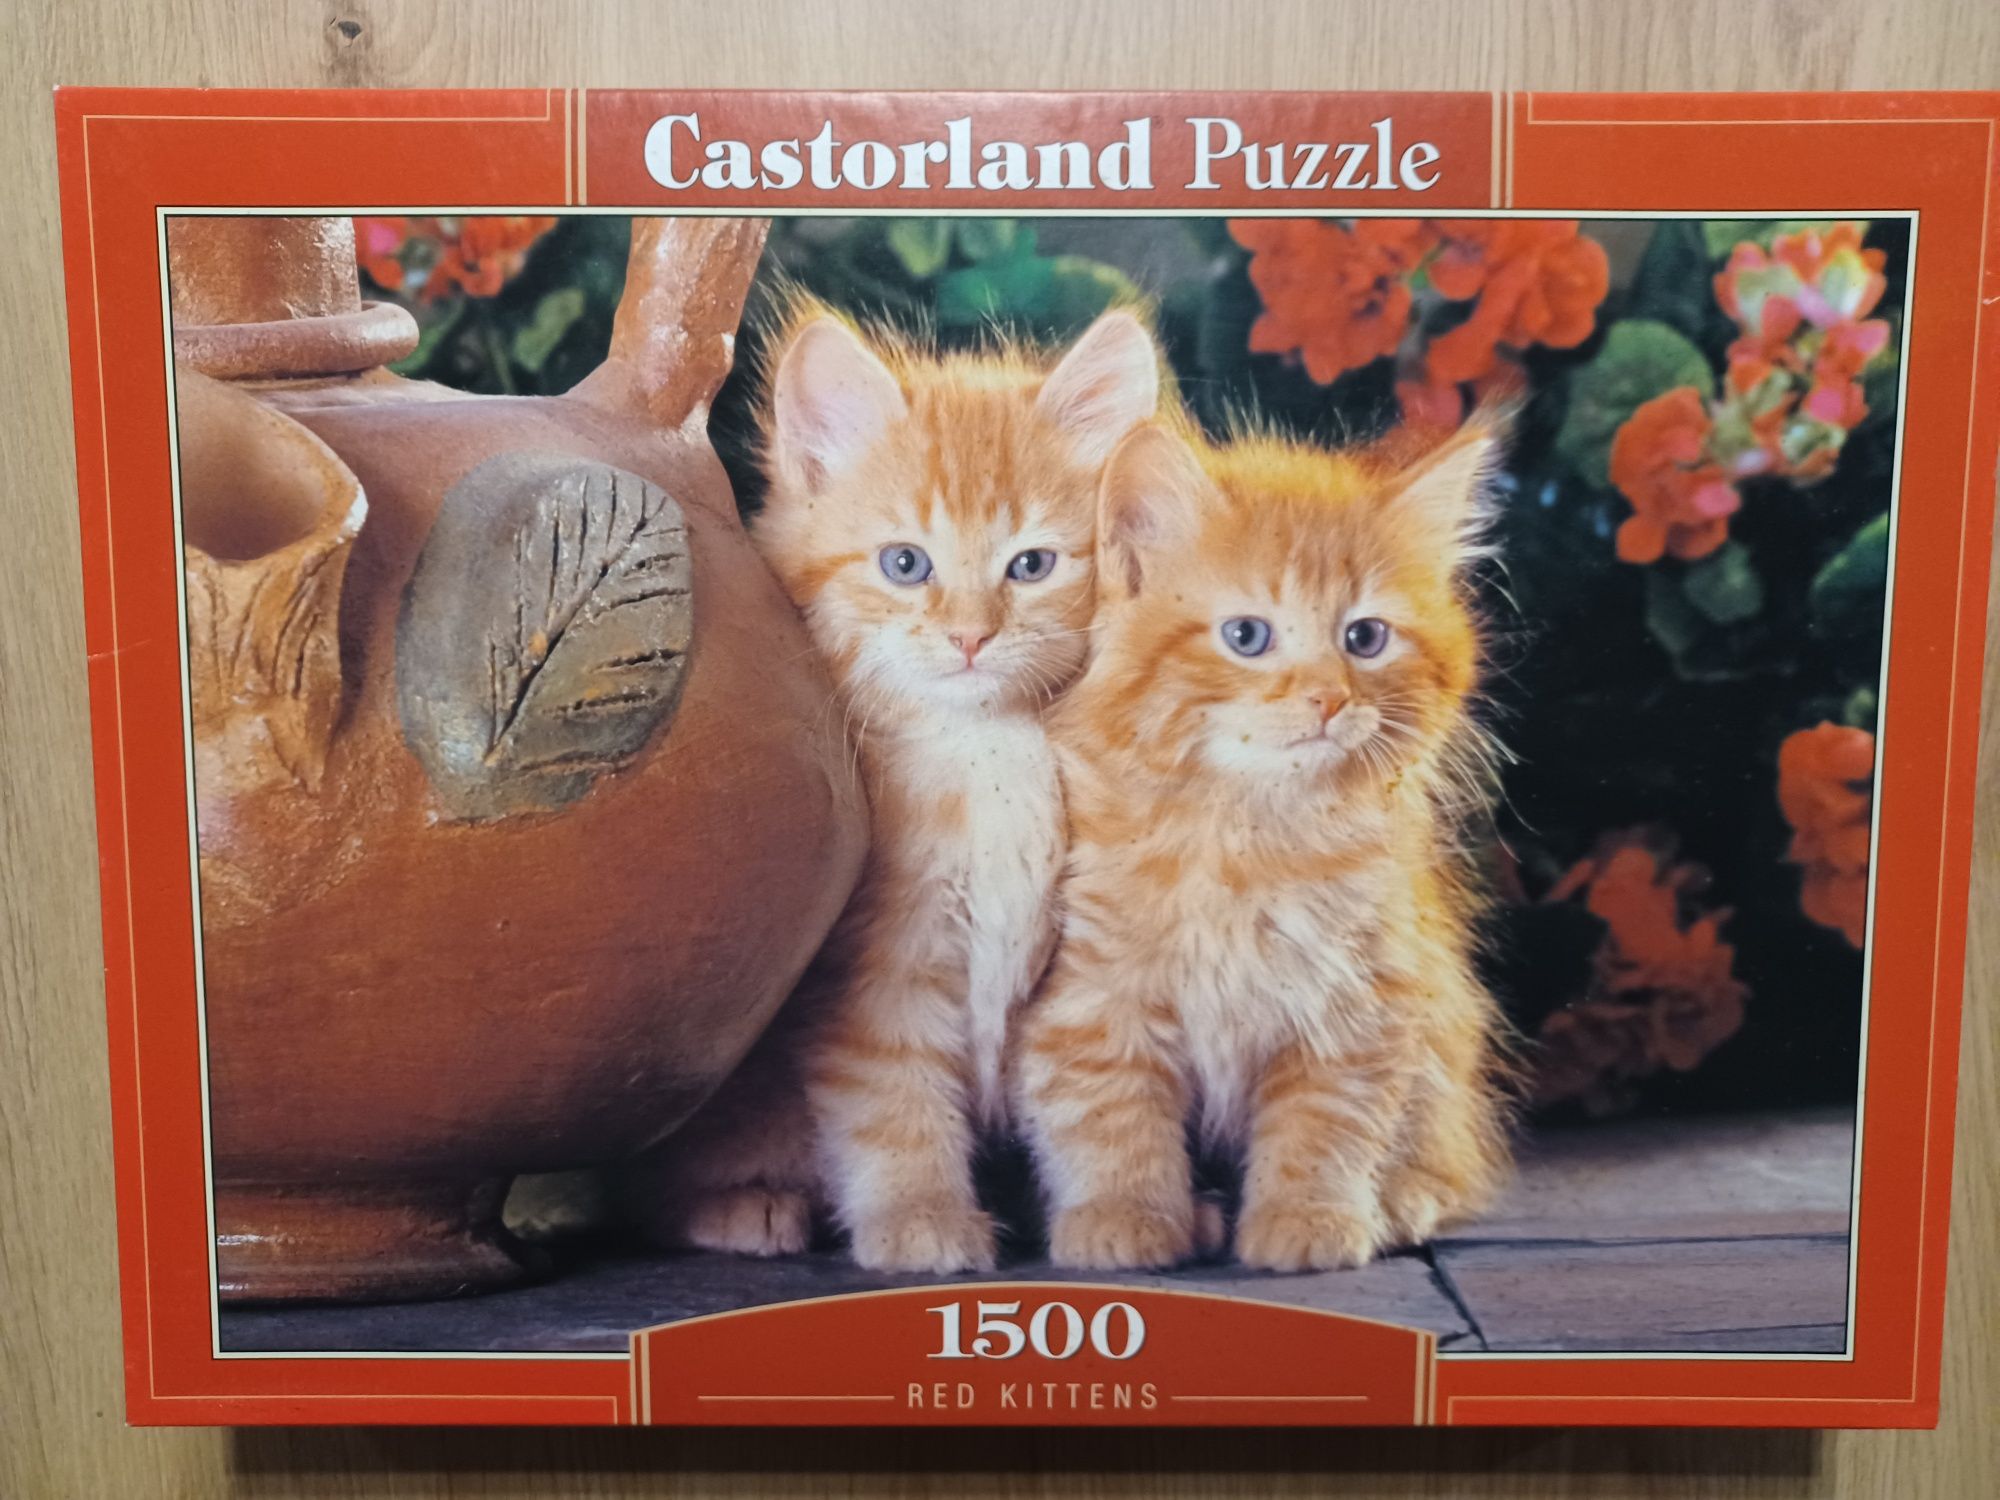 Puzzle Castorland "Red kittens" 1500